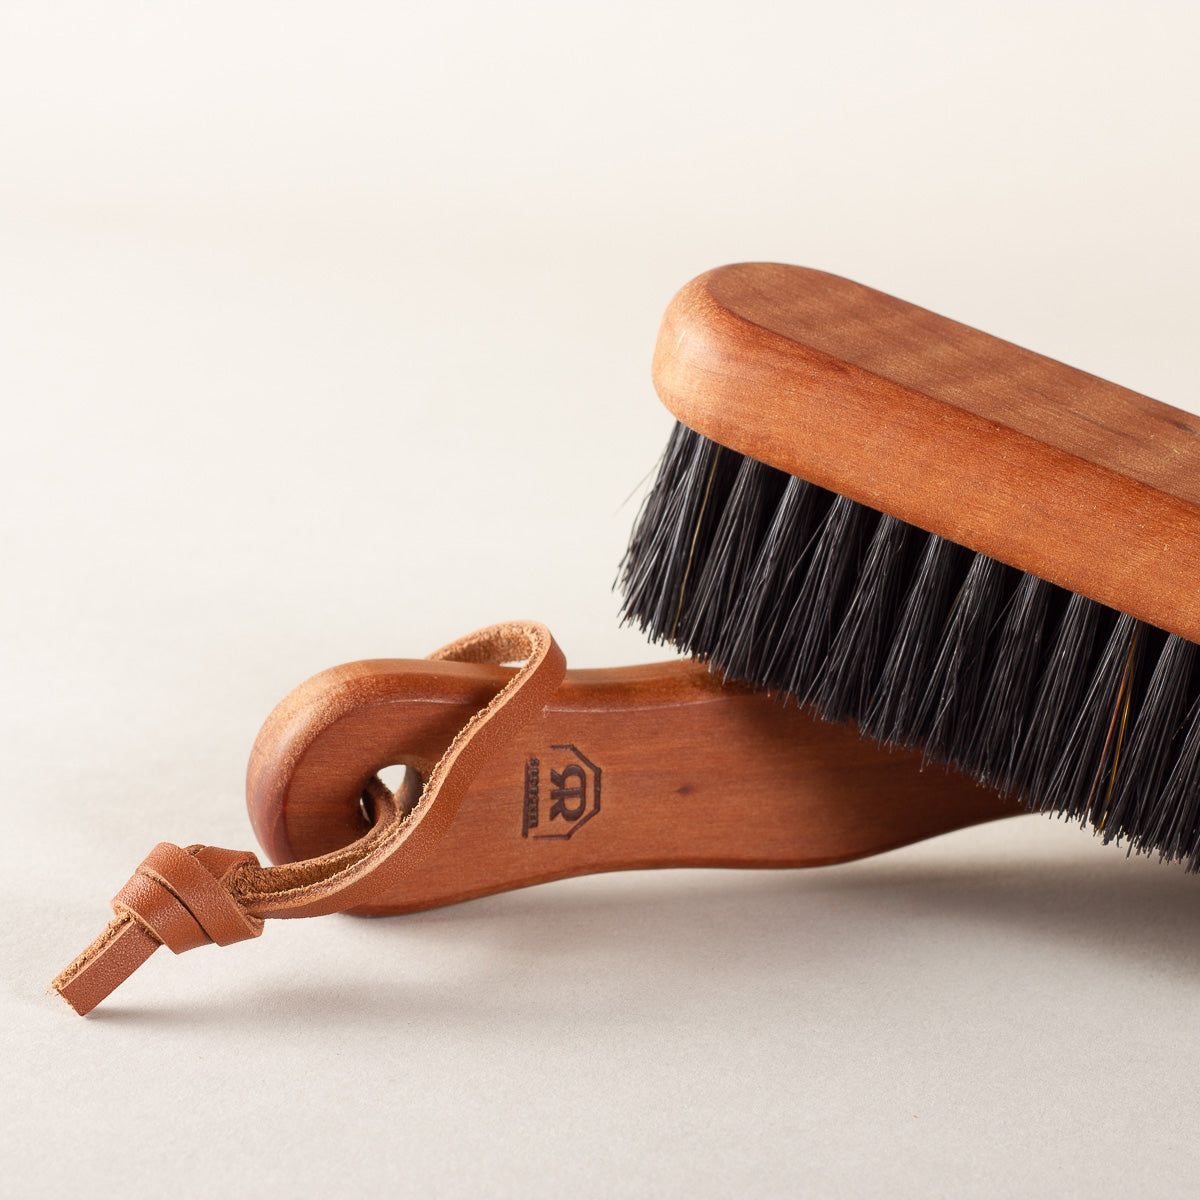 Clothing brushes & care — The Shoe Care Shop